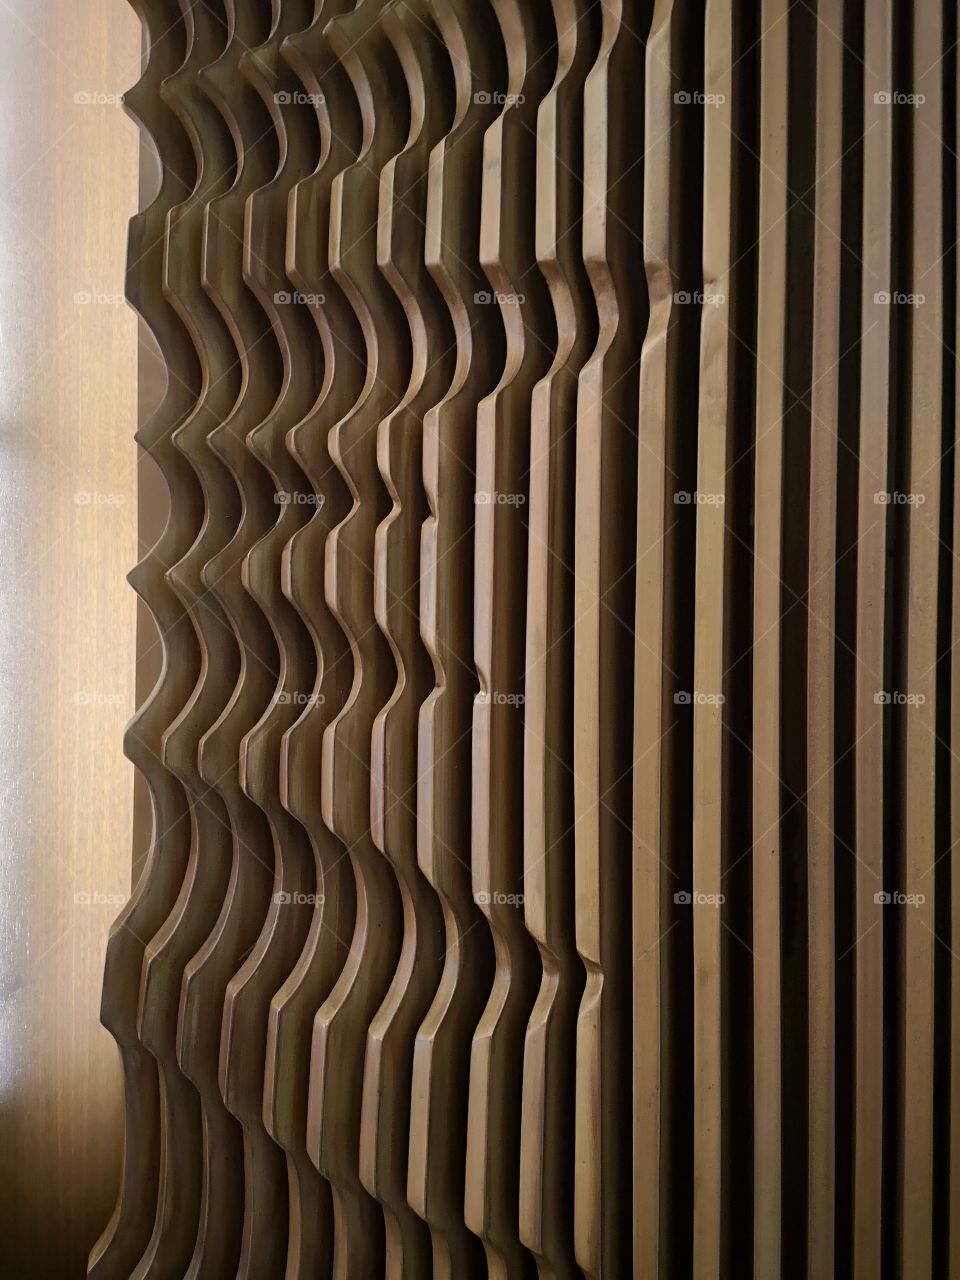 Wooden waves